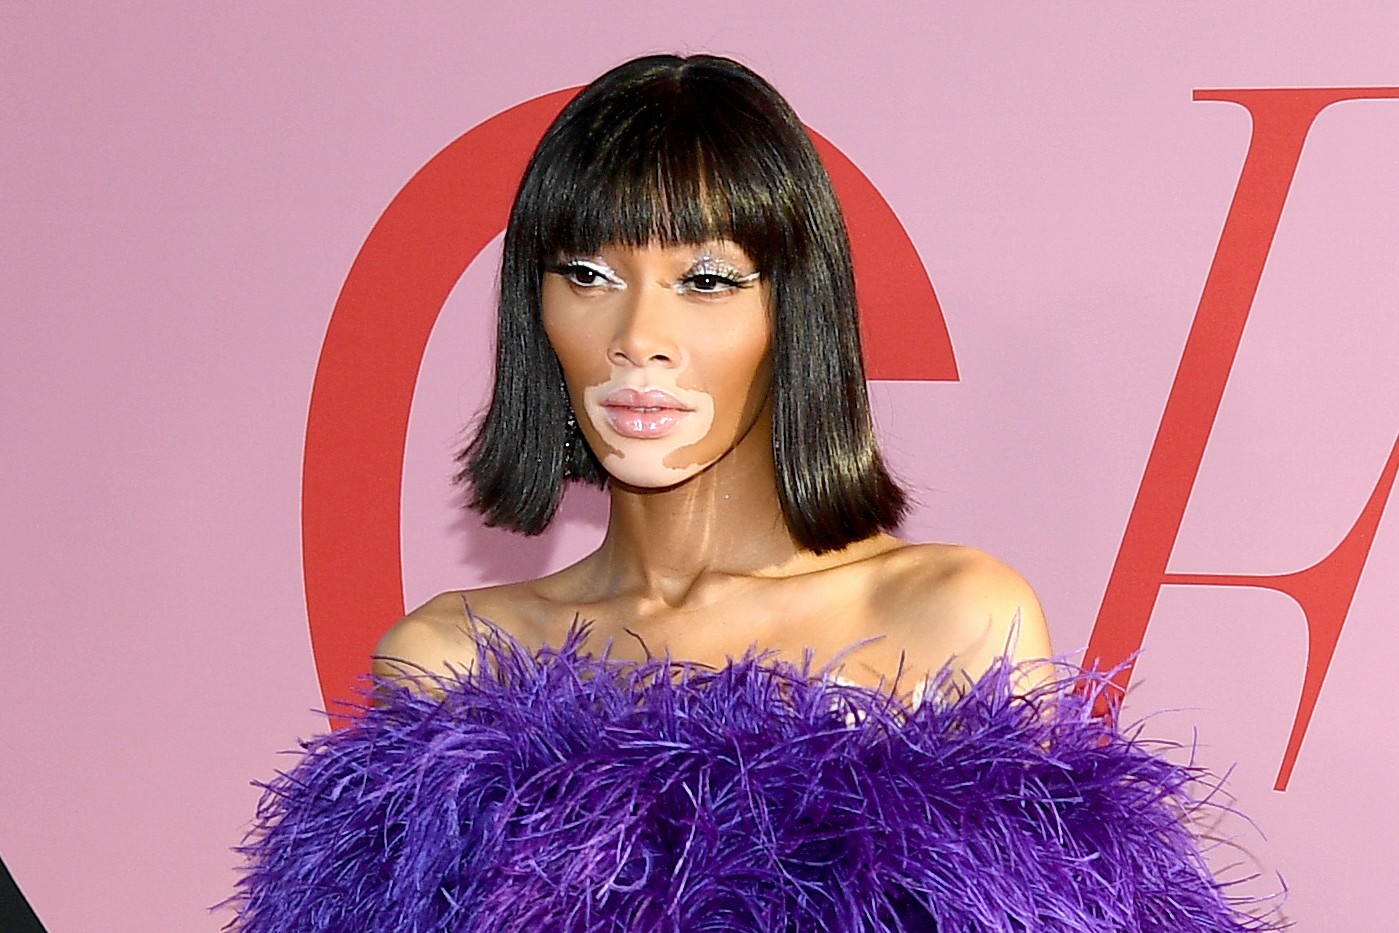 NEW YORK, NEW YORK - JUNE 03: Winnie Harlow attends the CFDA Fashion Awards at the Brooklyn Museum of Art on June 03, 2019 in New York City. (Photo by Dimitrios Kambouris/Getty Images) (Foto: Getty Images)